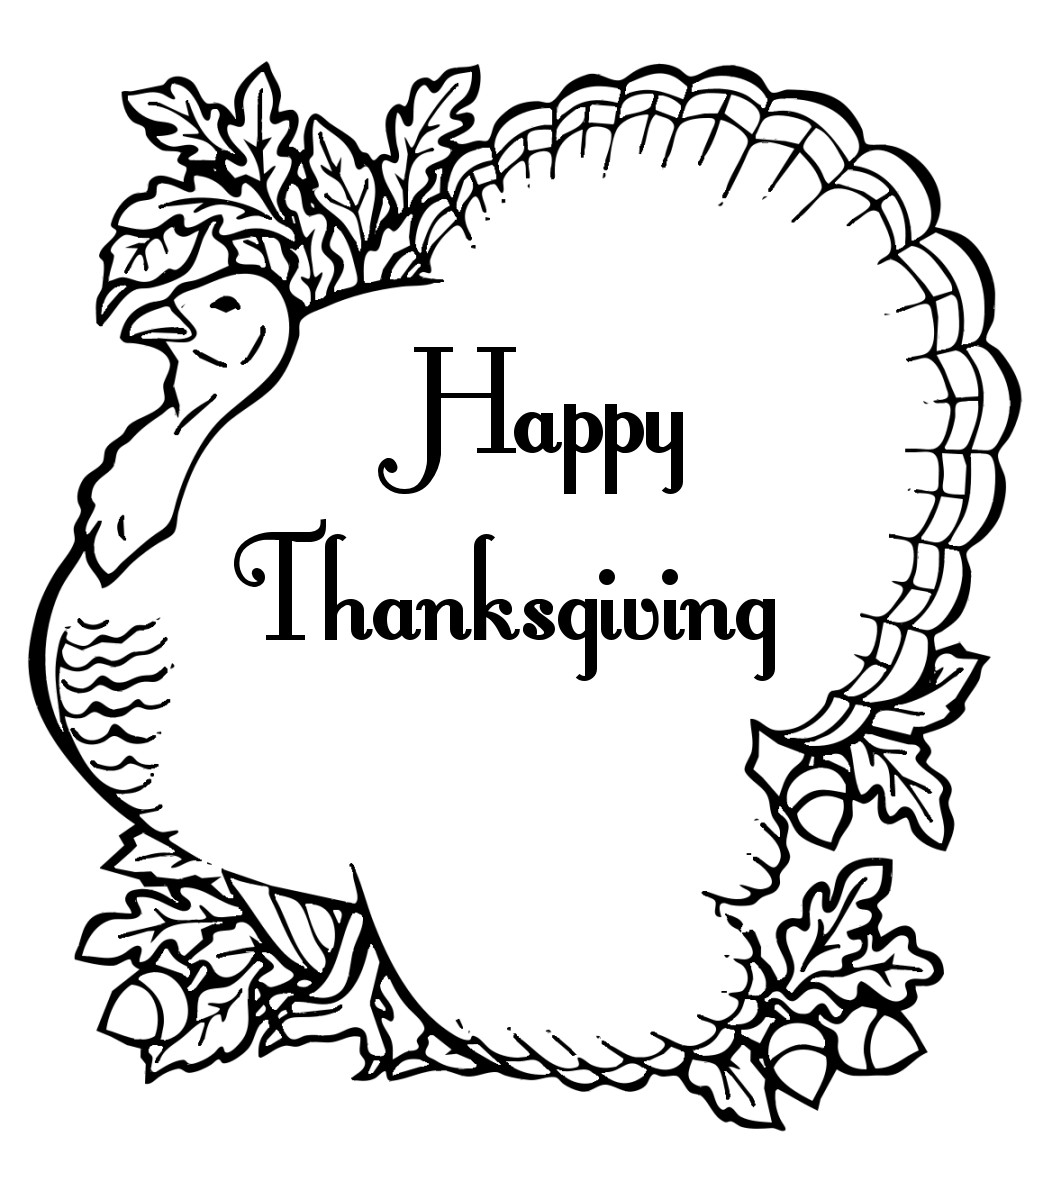 Thanksgiving Turkey Clipart Black And White
 Thanksgiving Turkey Clipart – Black And White – 101 Clip Art